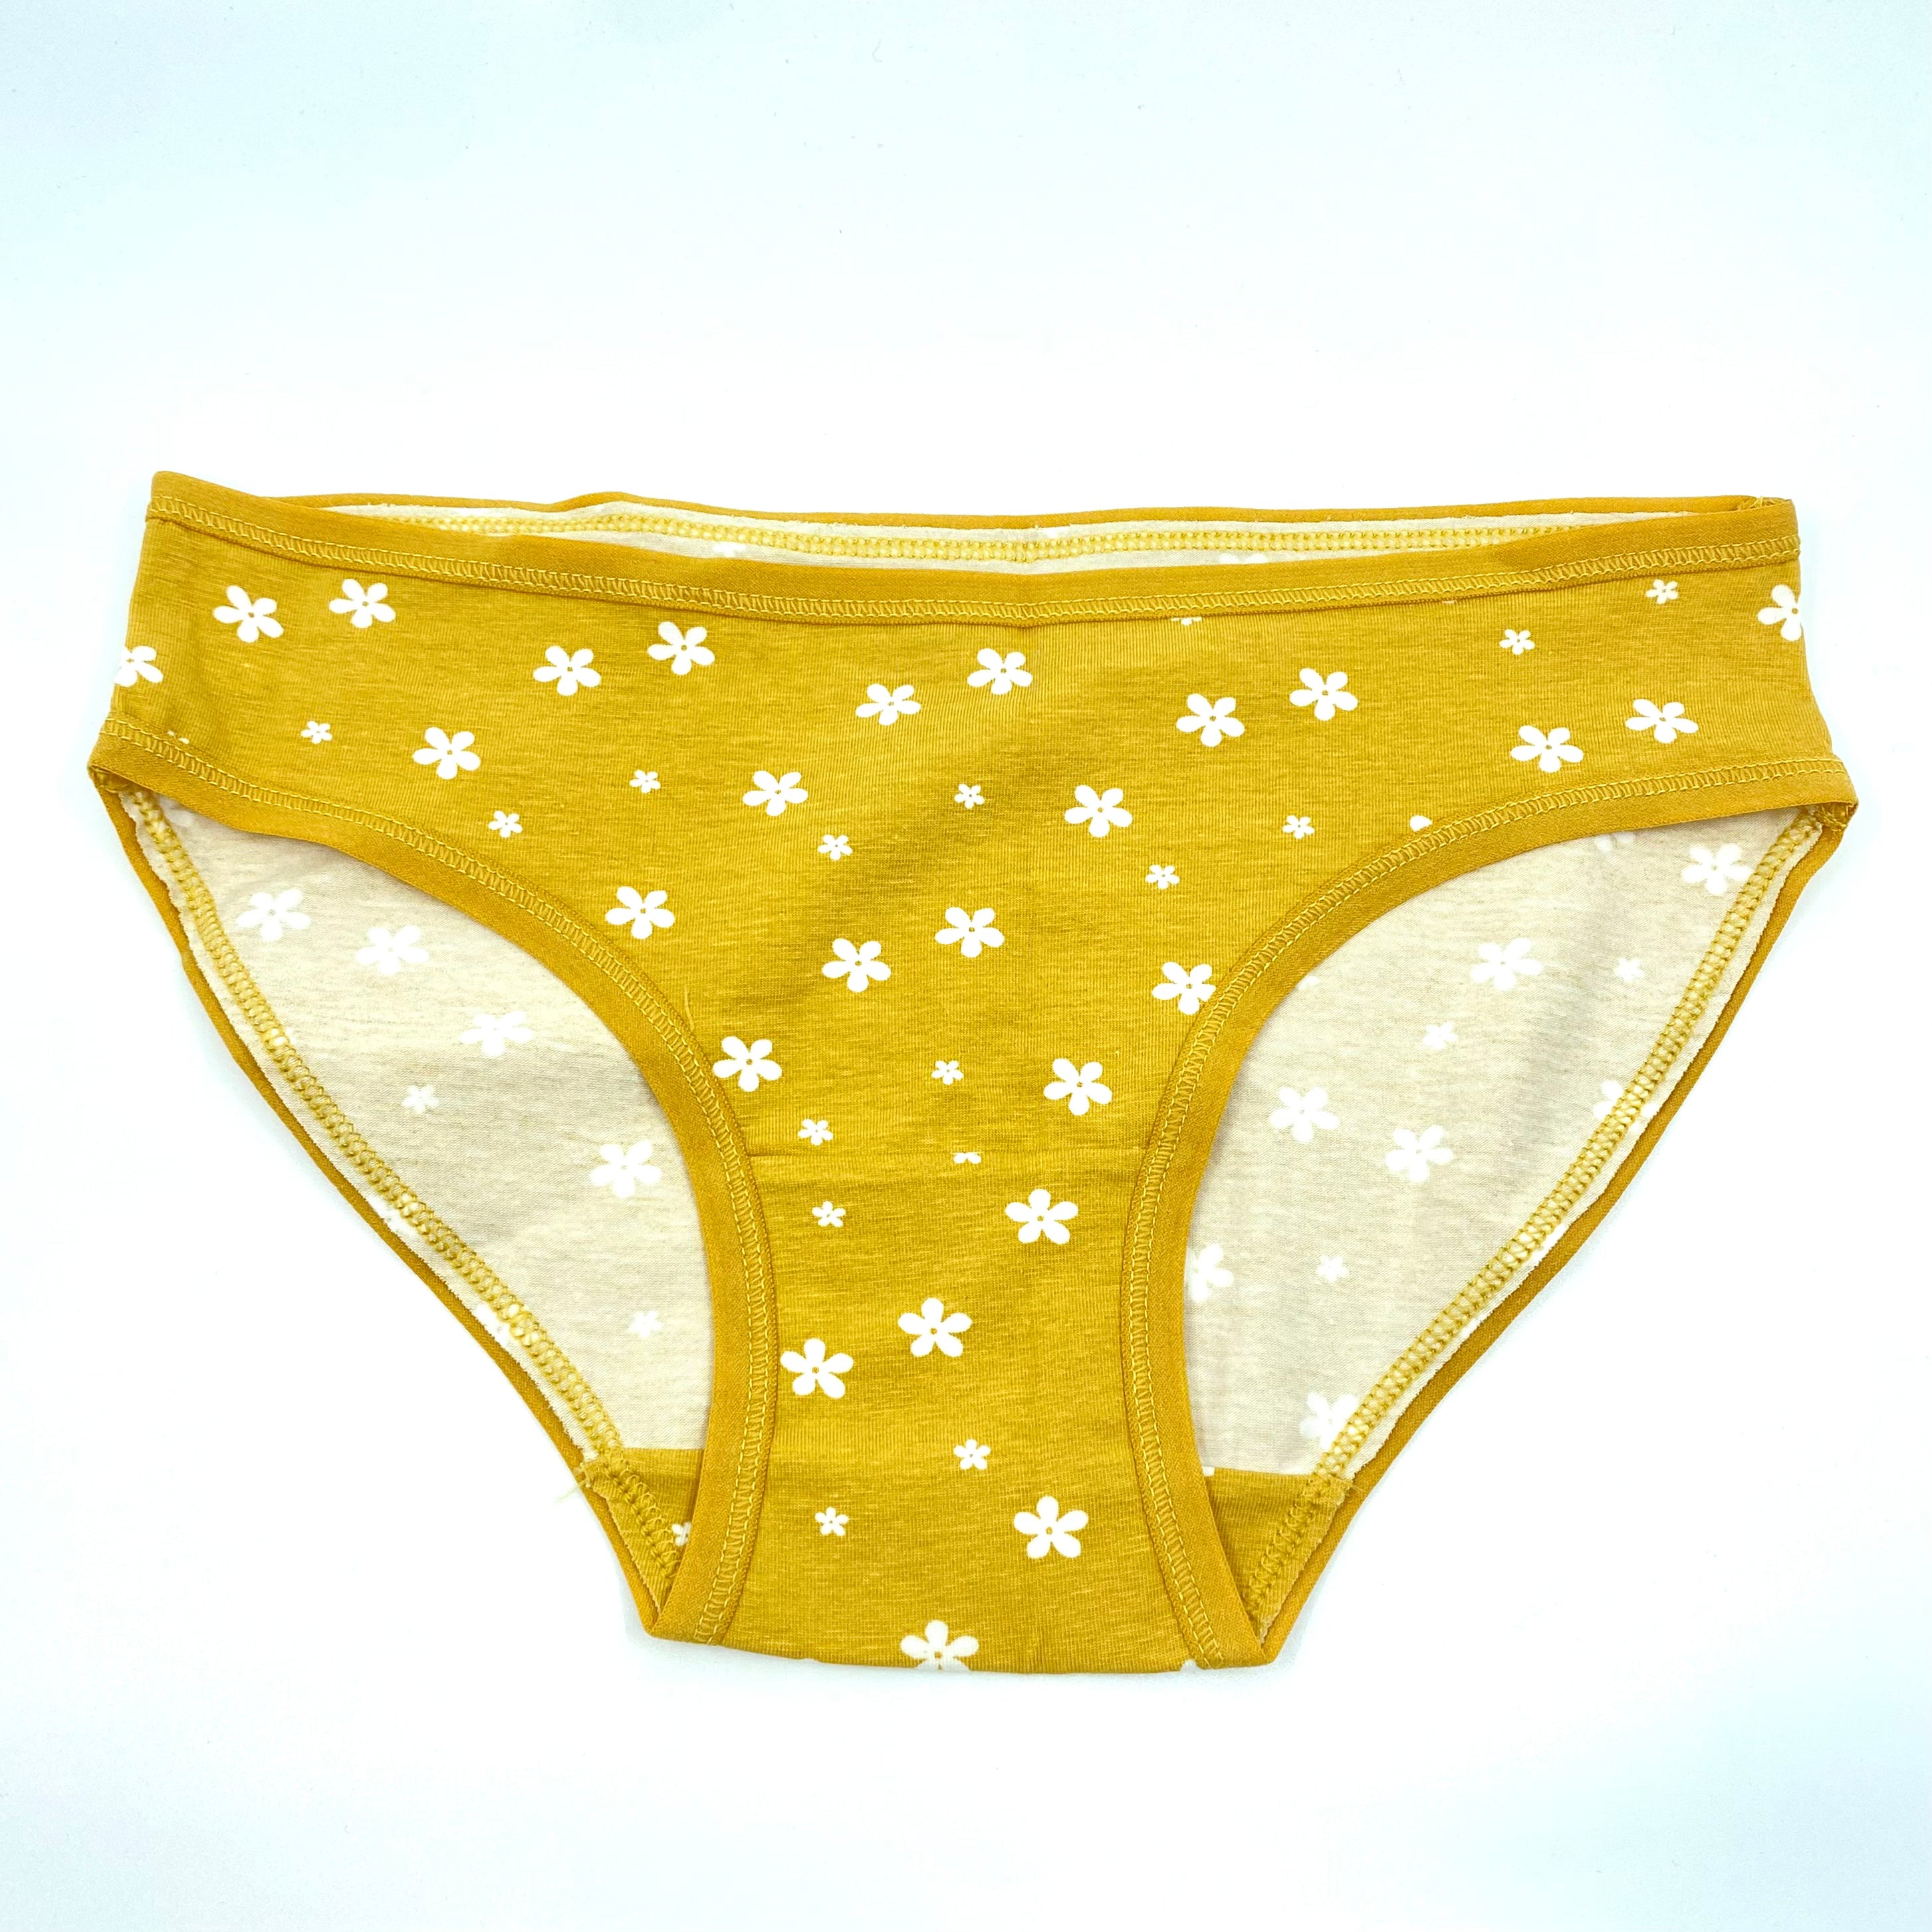 Girls' organic cotton knickers - yellow with white flowers